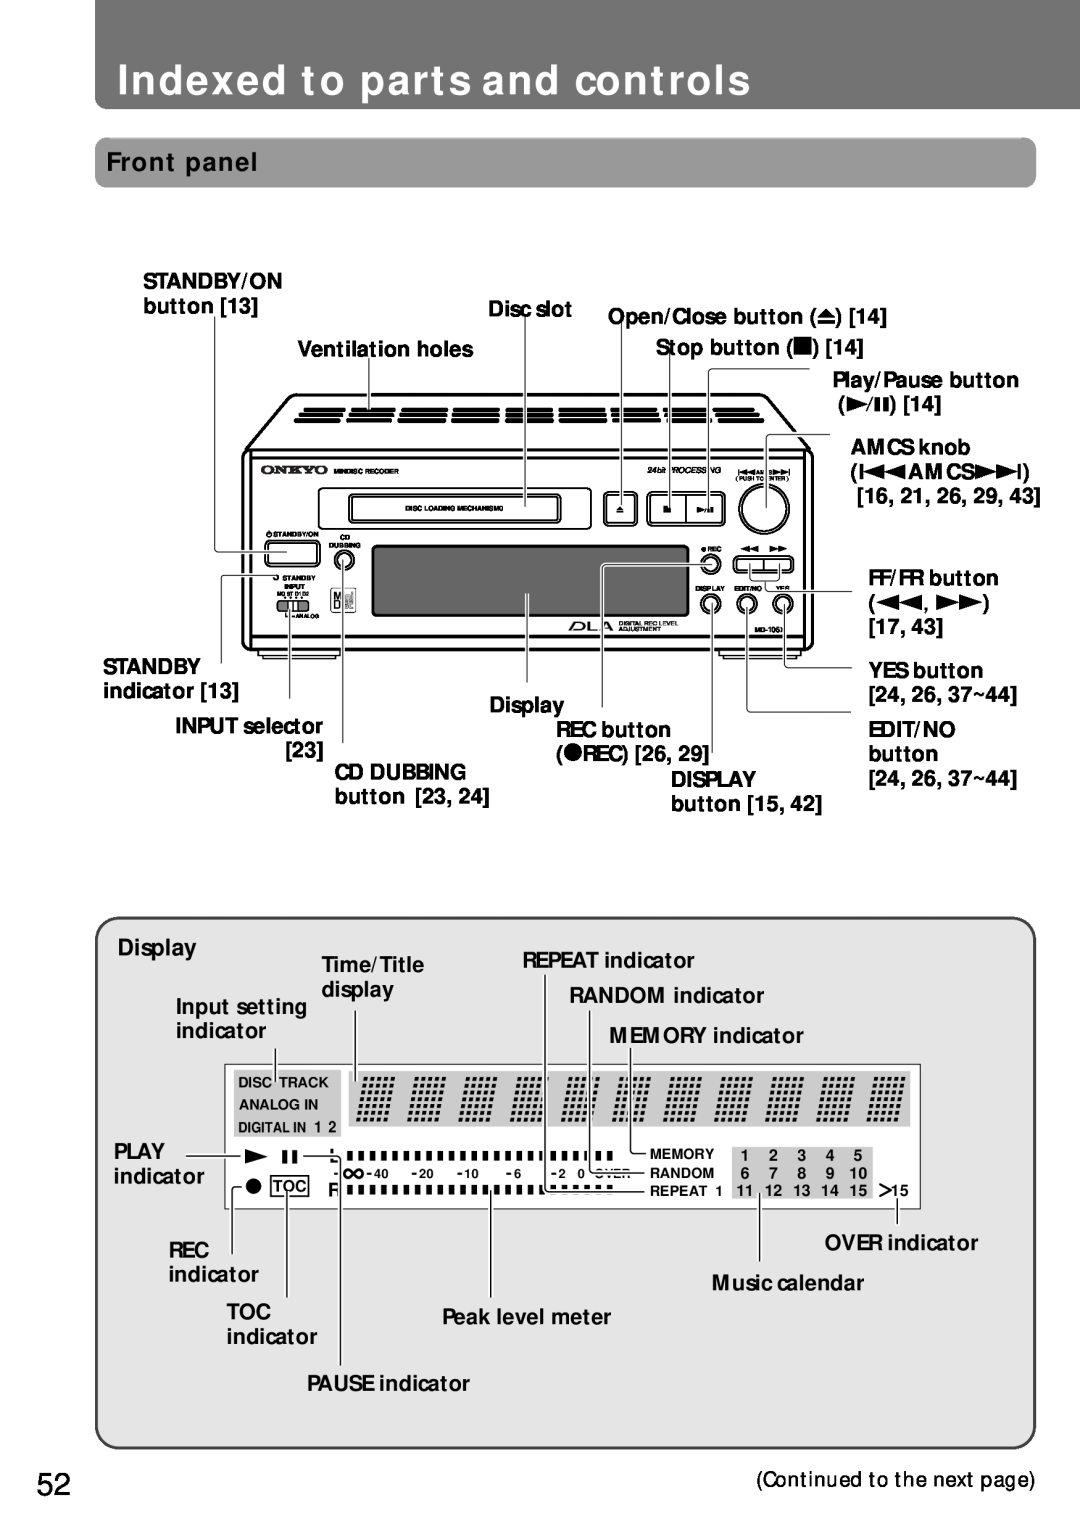 Onkyo MD-105X Indexed to parts and controls, Front panel, Display, Standby/On, Disc slot Open/Close button r, qAMCSw 